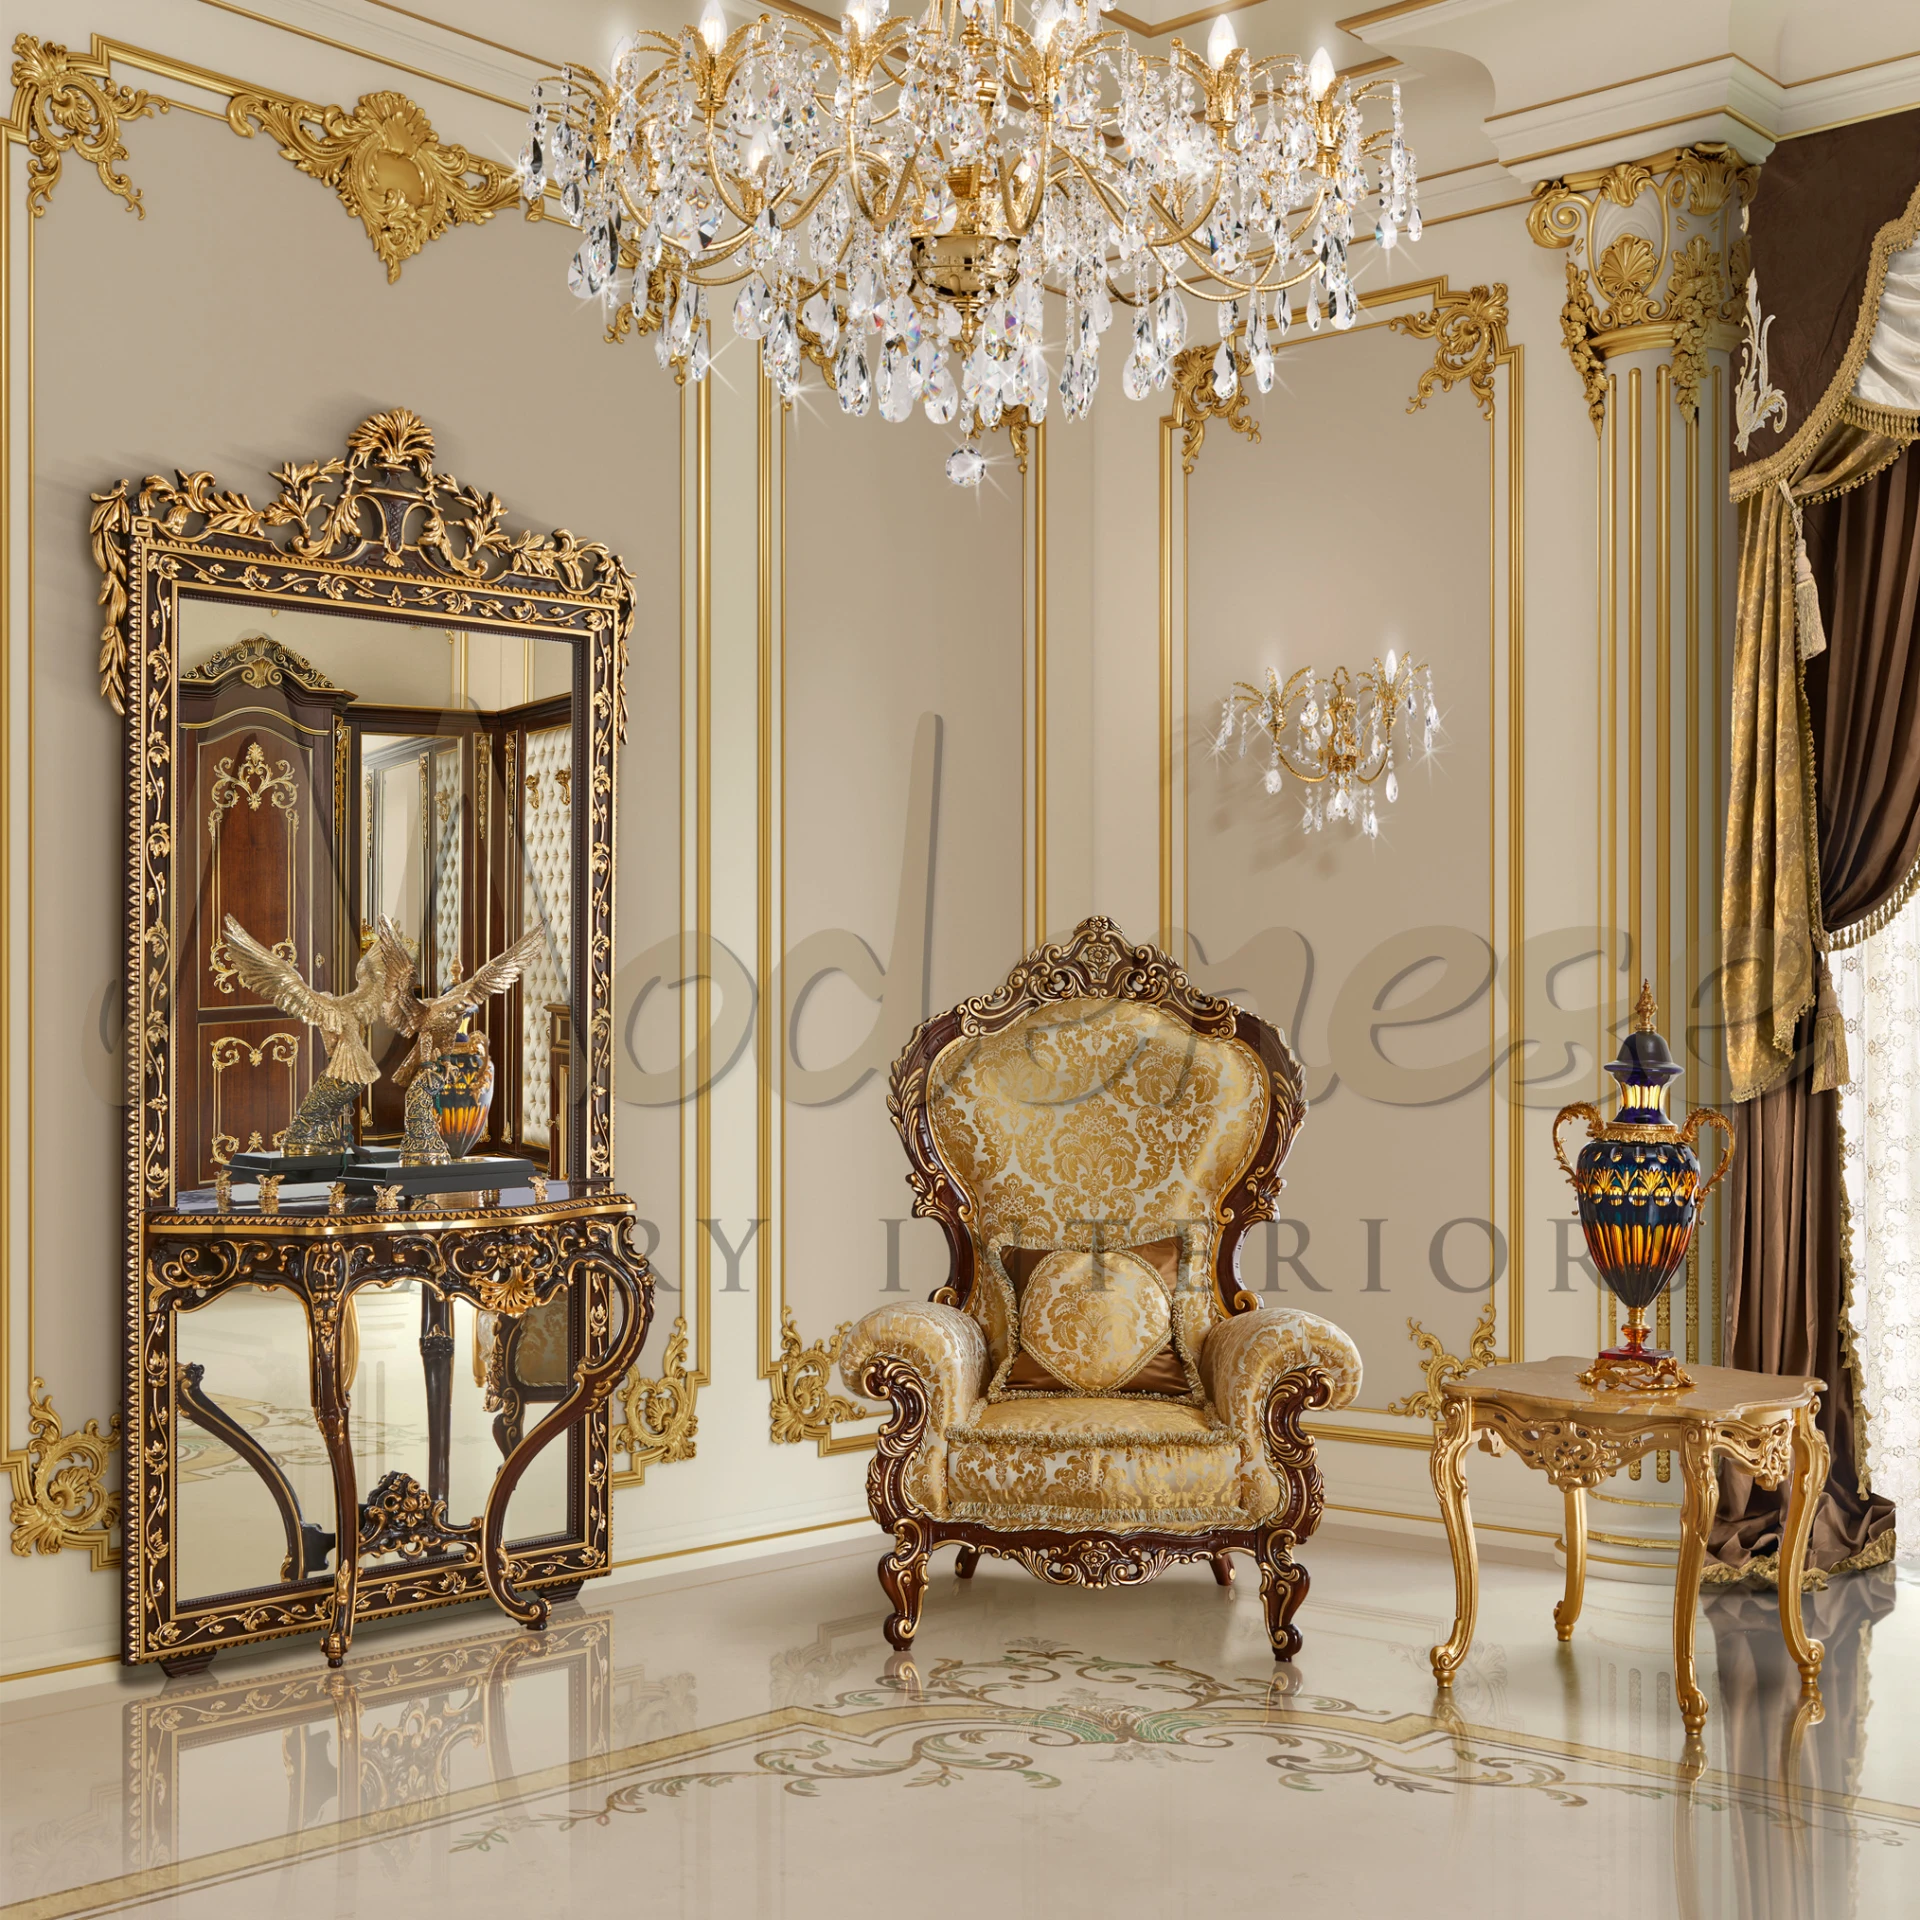 Elegant throne-like Golden Rococo Armchair, featuring classic walnut finishing and gold leaf details for a regal home decor.